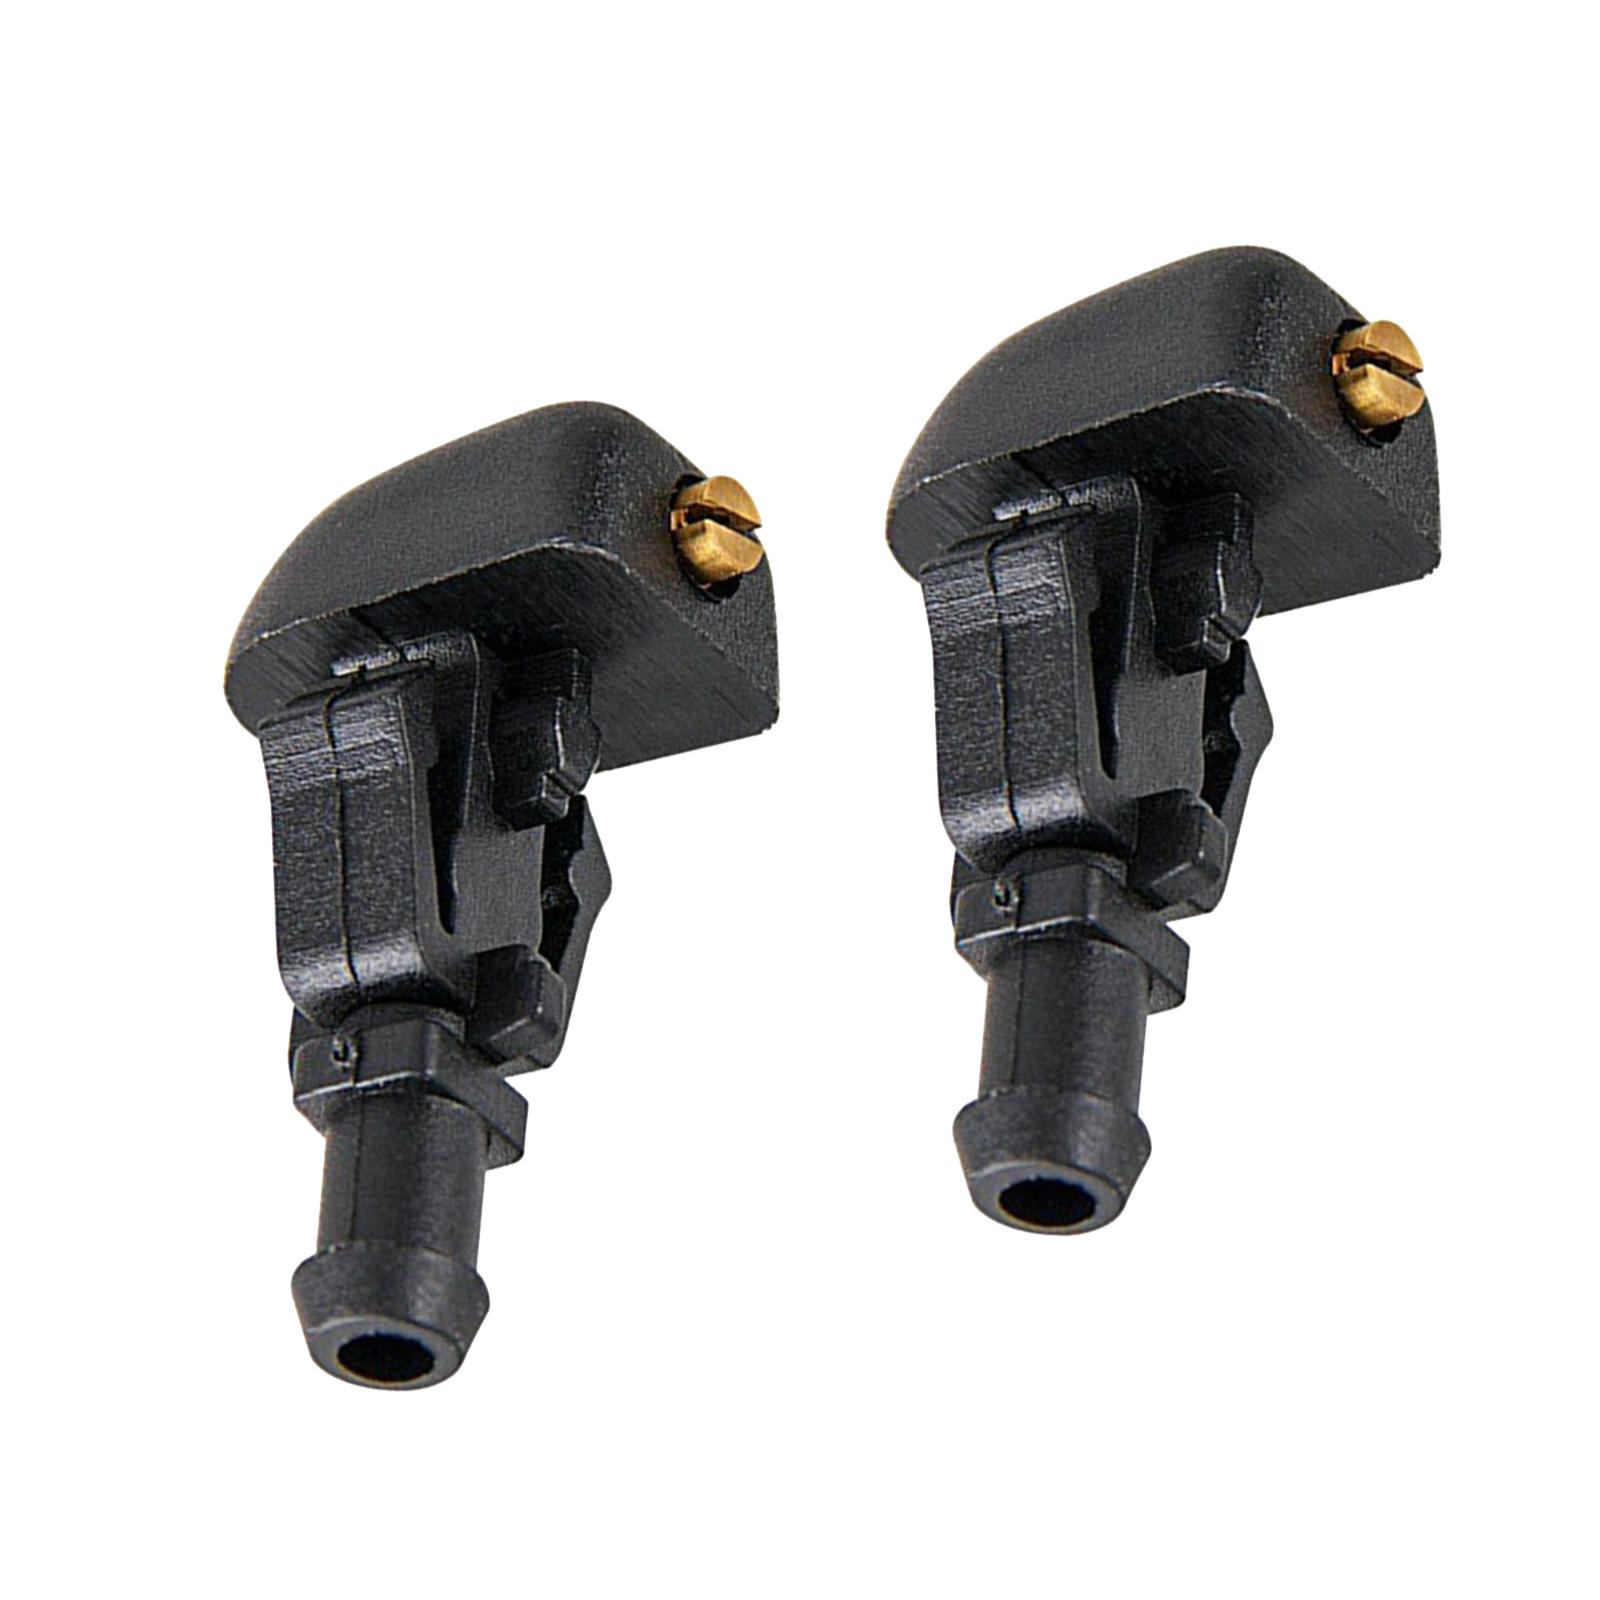 2 Pieces Windshield Washer Nozzle Spray Jet for Ford F150 2004 -2014